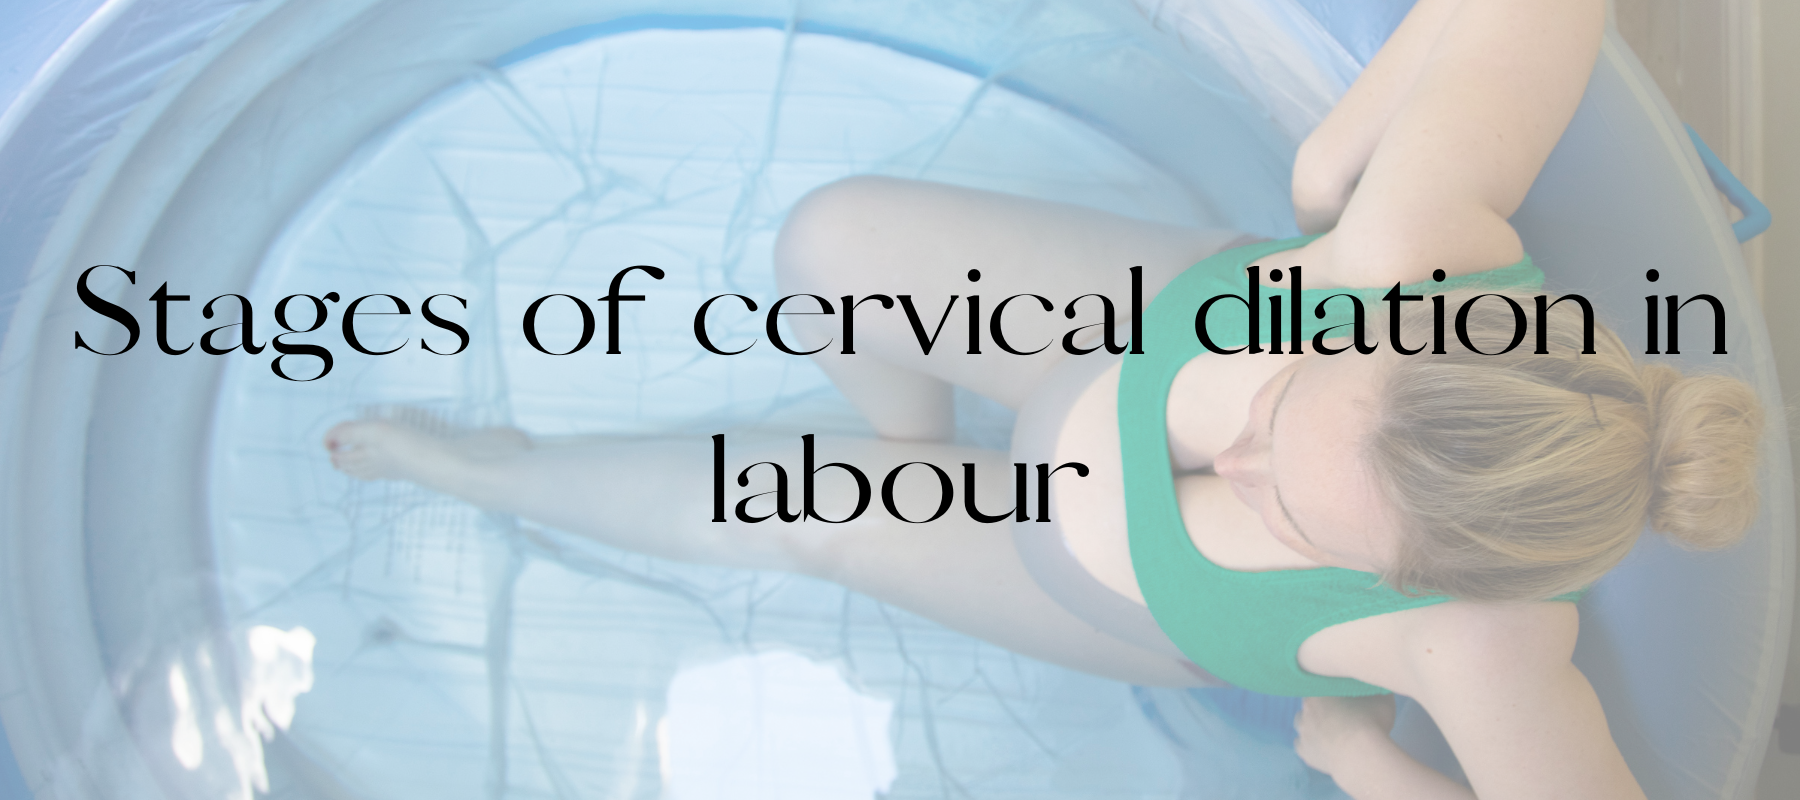 Stages of cervical dilation in labour